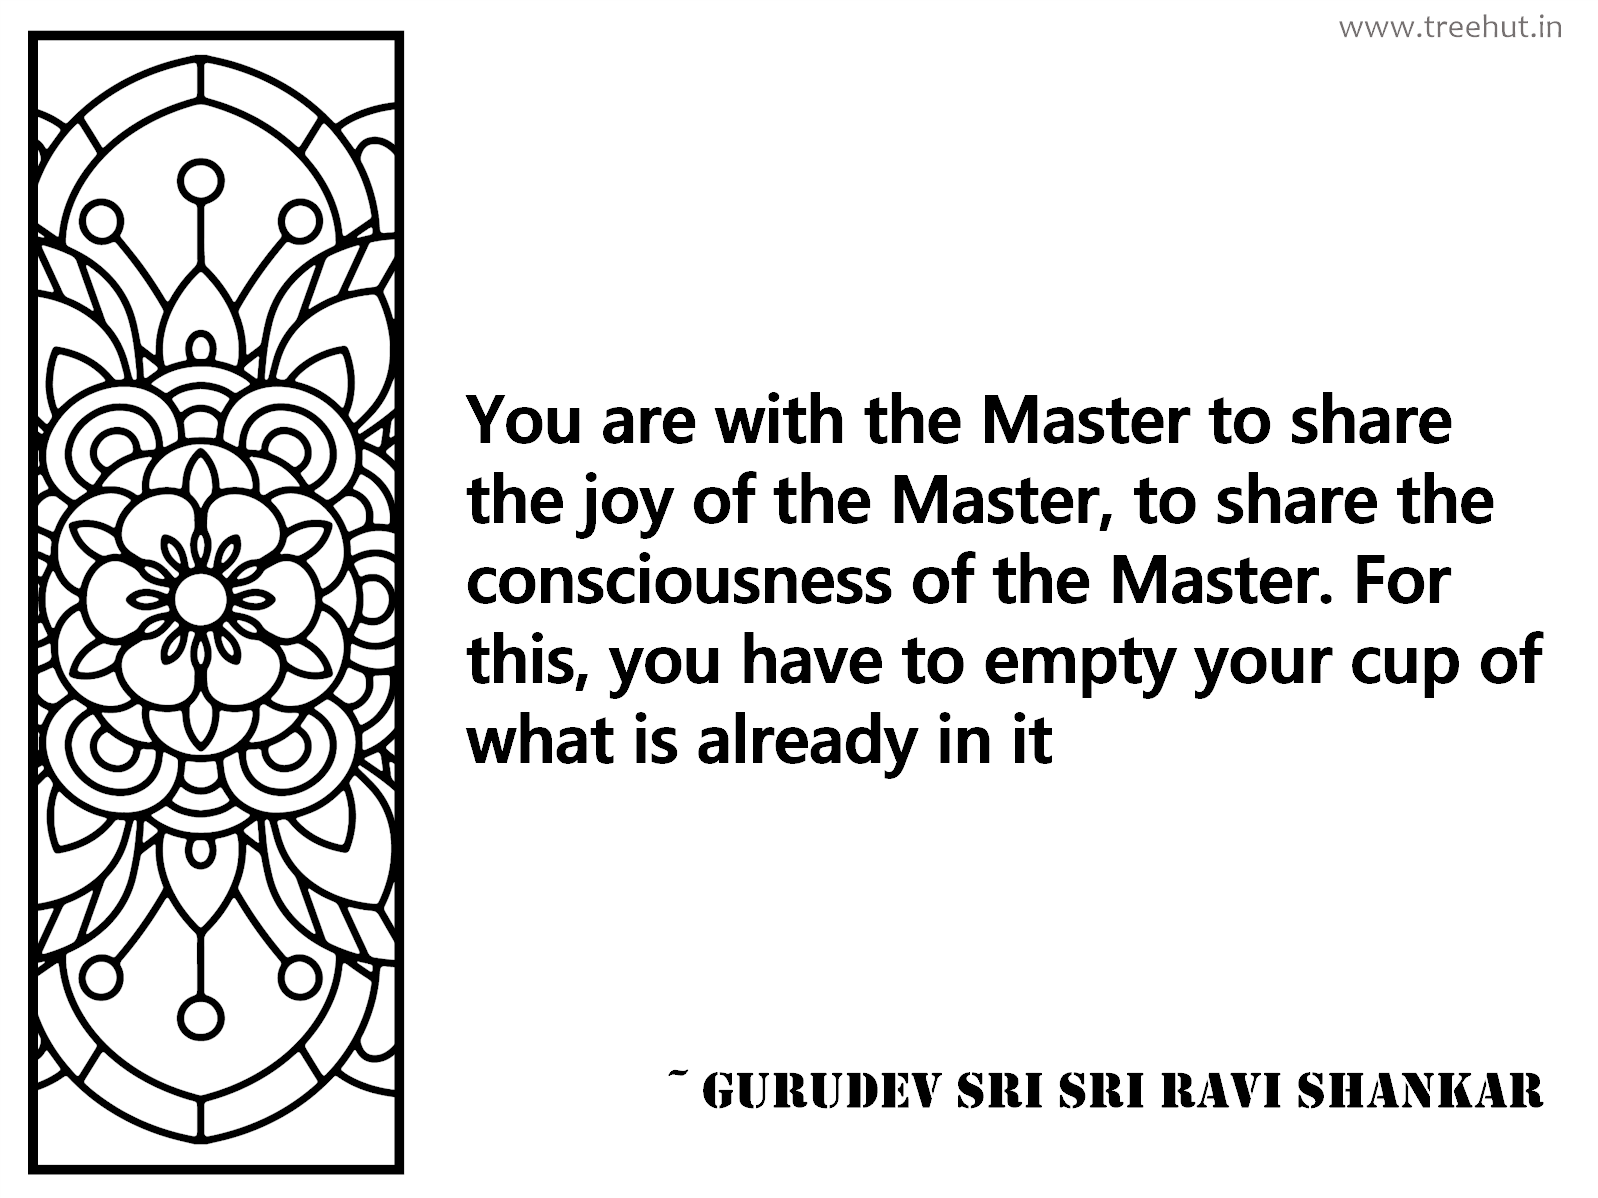 You are with the Master to share the joy of the Master, to share the consciousness of the Master. For this, you have to empty your cup of what is already in it Inspirational Quote by Gurudev Sri Sri Ravi Shankar, coloring pages